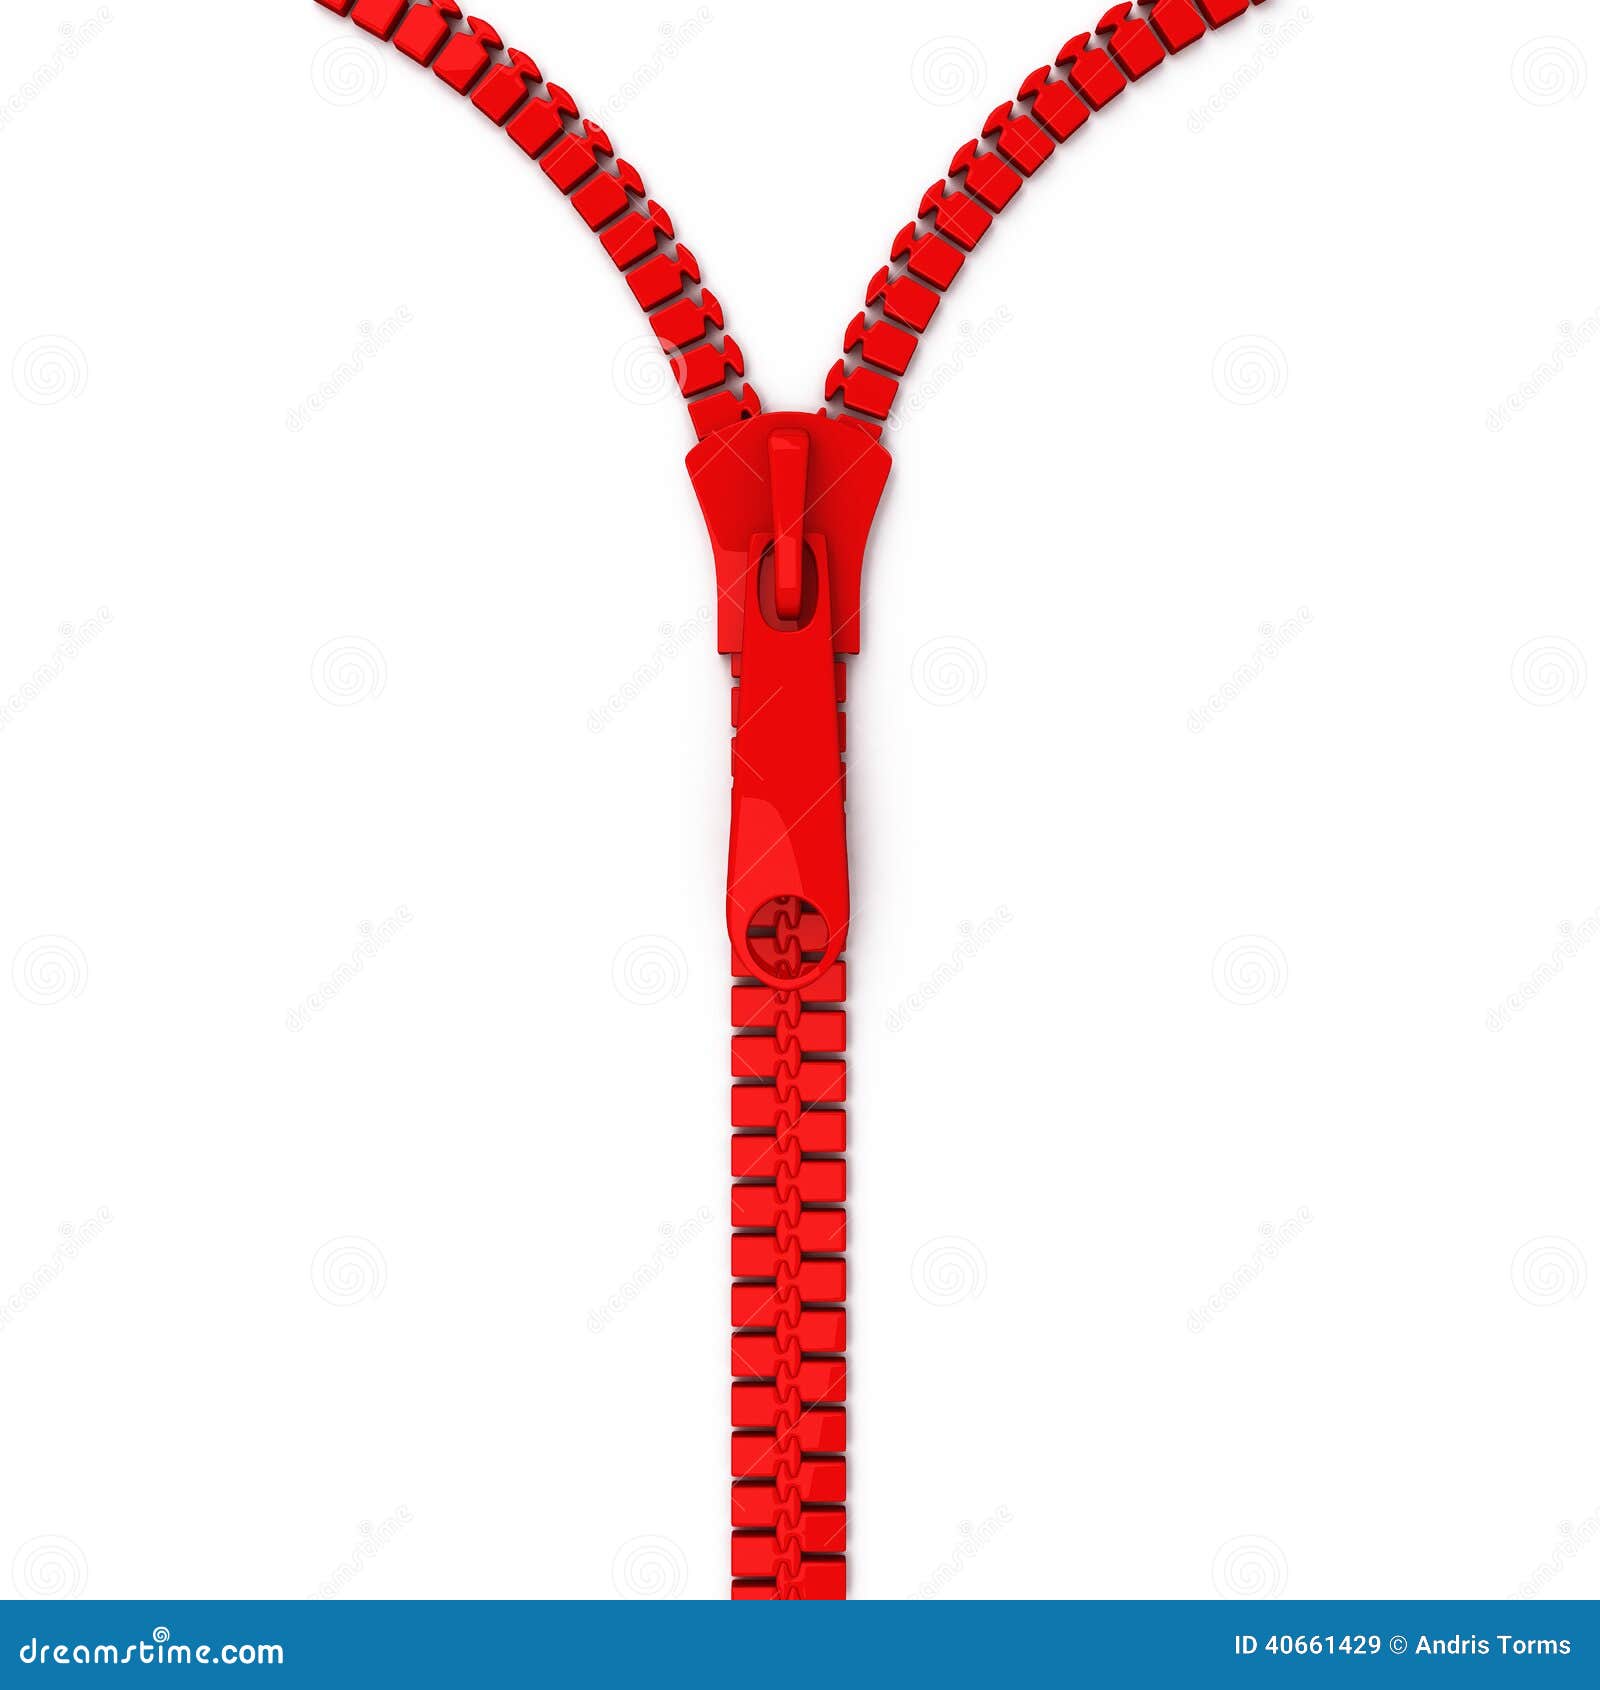 clipart picture of zipper - photo #39